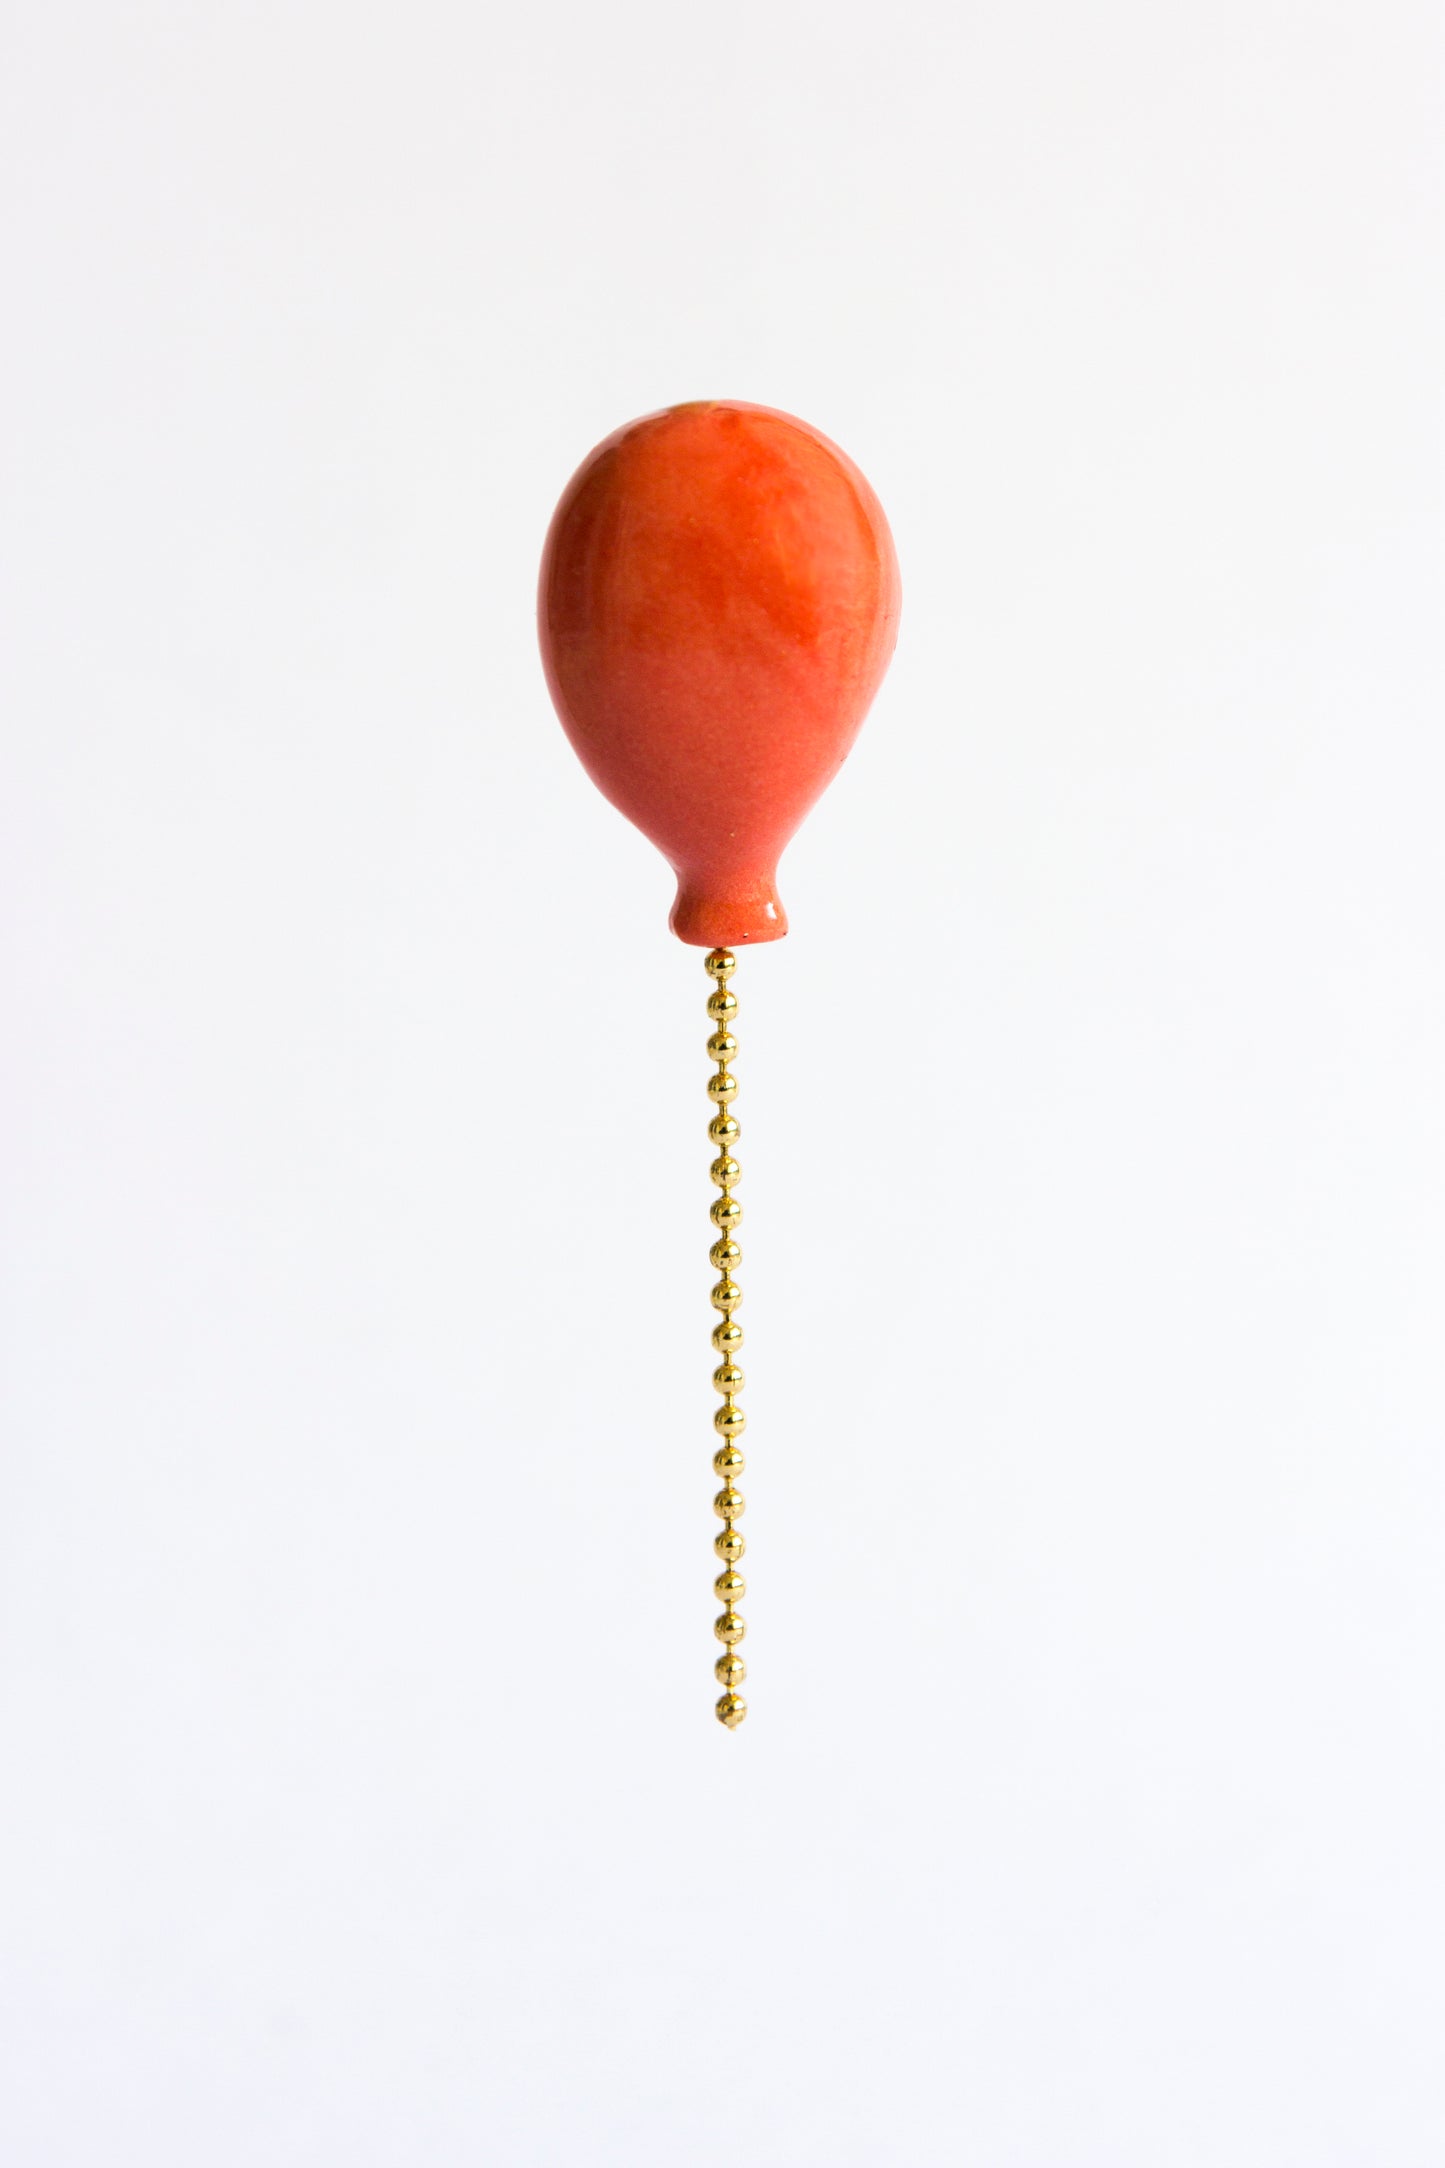 Lost Balloon Pin by Stook Jewellery